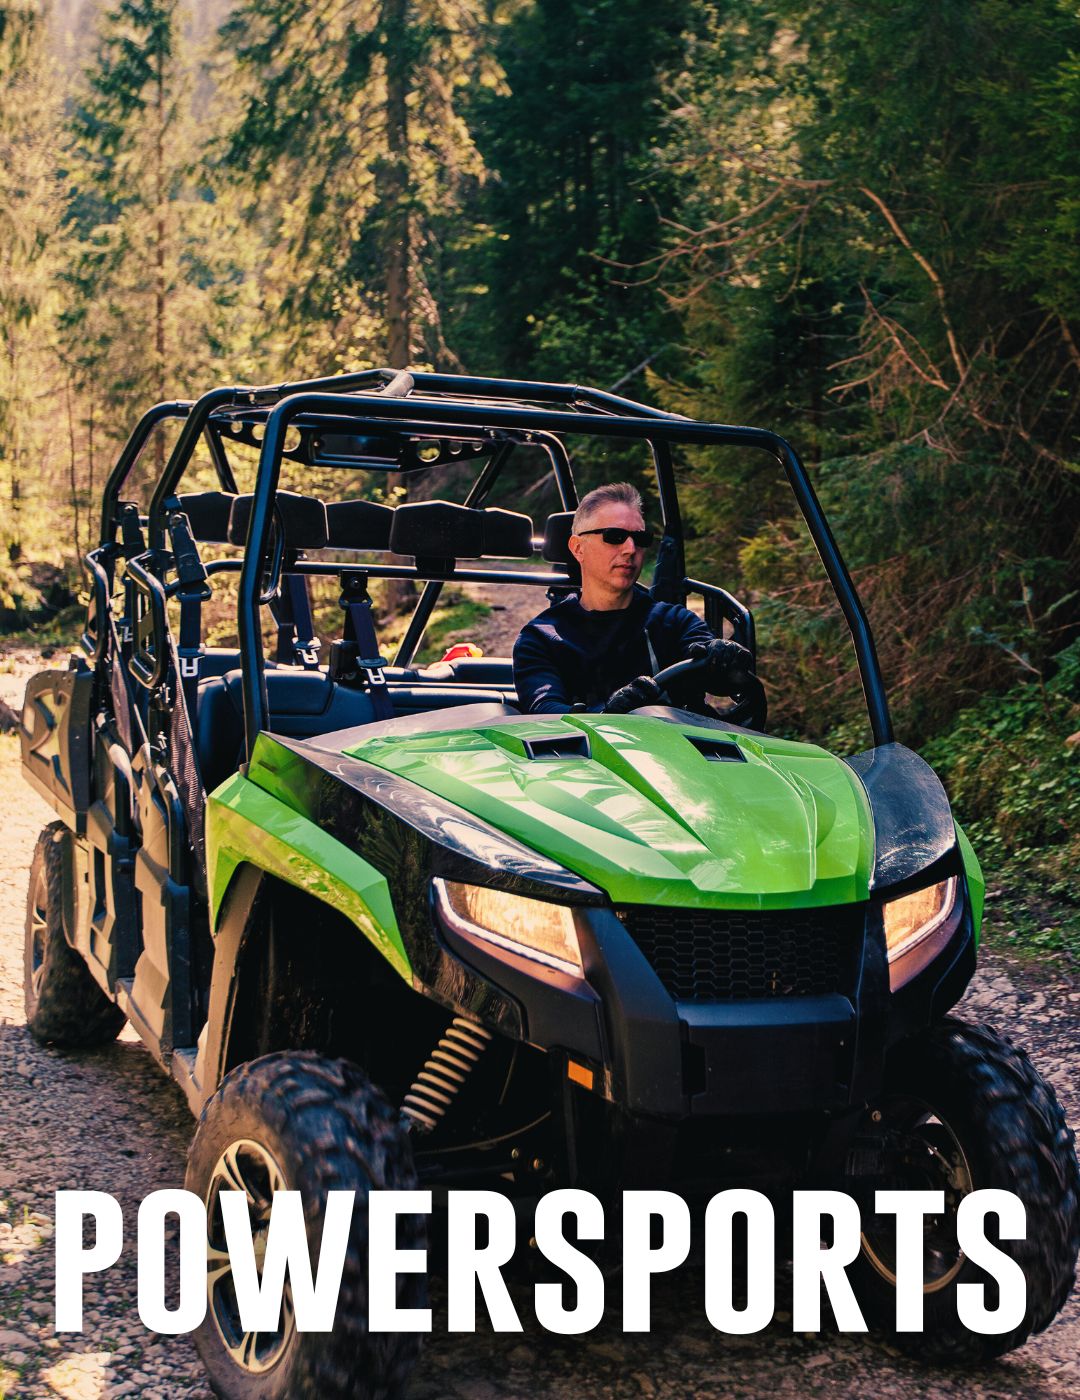 finance and purchase your powersports, atv, side-by-side through Ironhorse Funding. kabota, cat